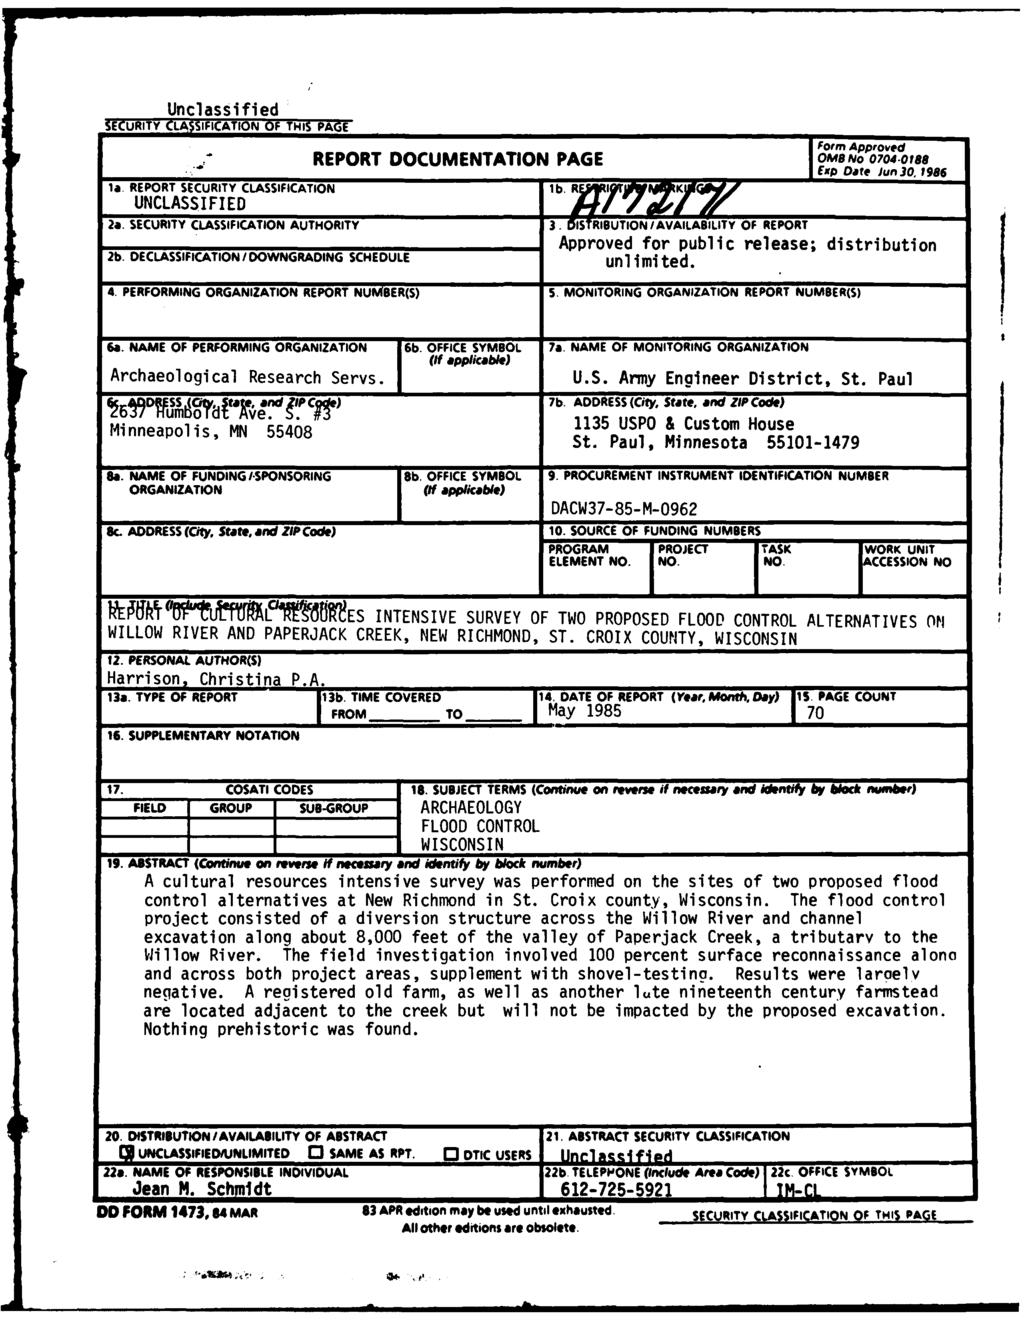 Unclassified SECURITY CLA SIFICATION OF THI PAGE Form Approved - REPORT DOCUMENTATION PAGE 04B No 0704.0188 ' _ExP Date Jun 30,1986 a REPORT SECURITY CLASSIFICATION bry ~ rt 7 KJ Za.